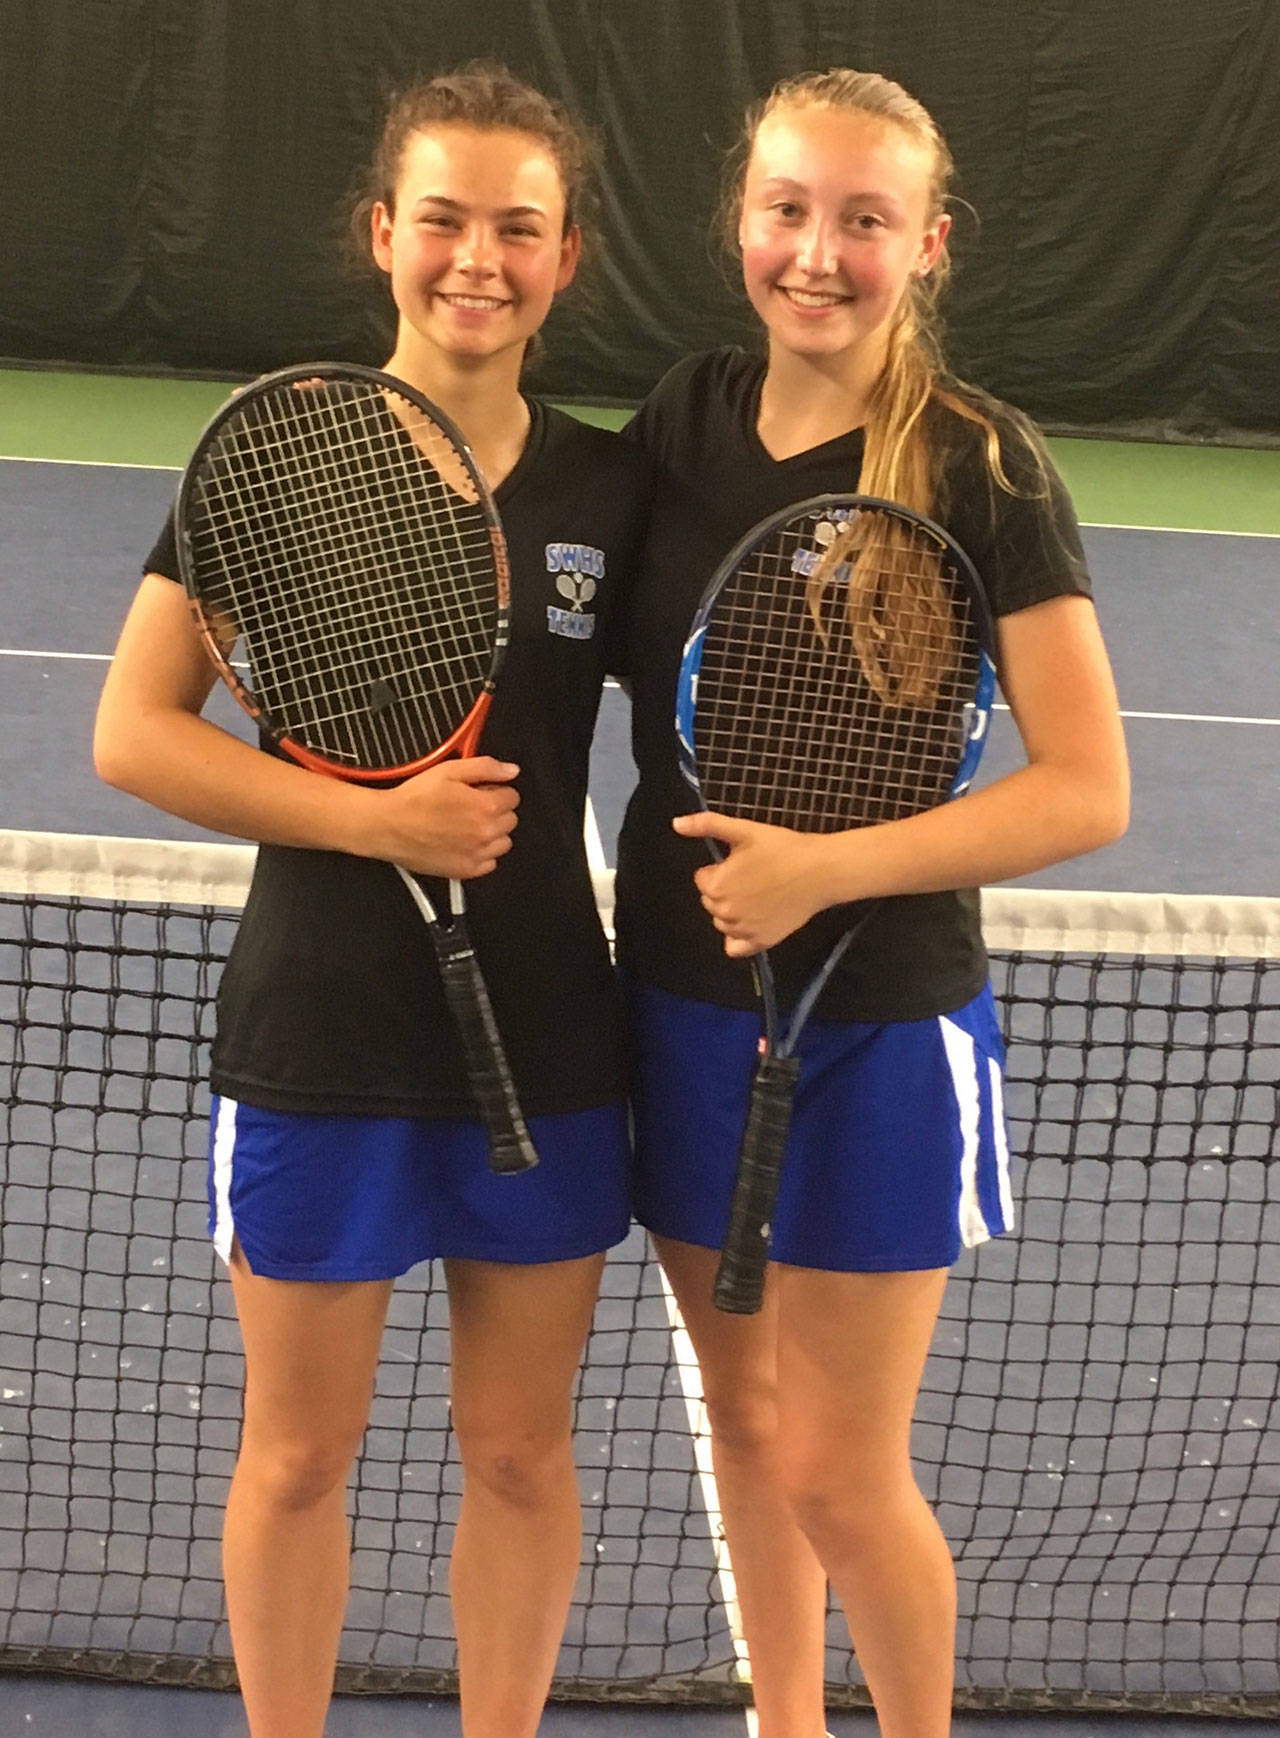 South Whidbey’s Alison Papritz, left, and Mary Zisette placed second in the state 1A tennis tournament. (Photo courtesy of Jennifer Gochanour)